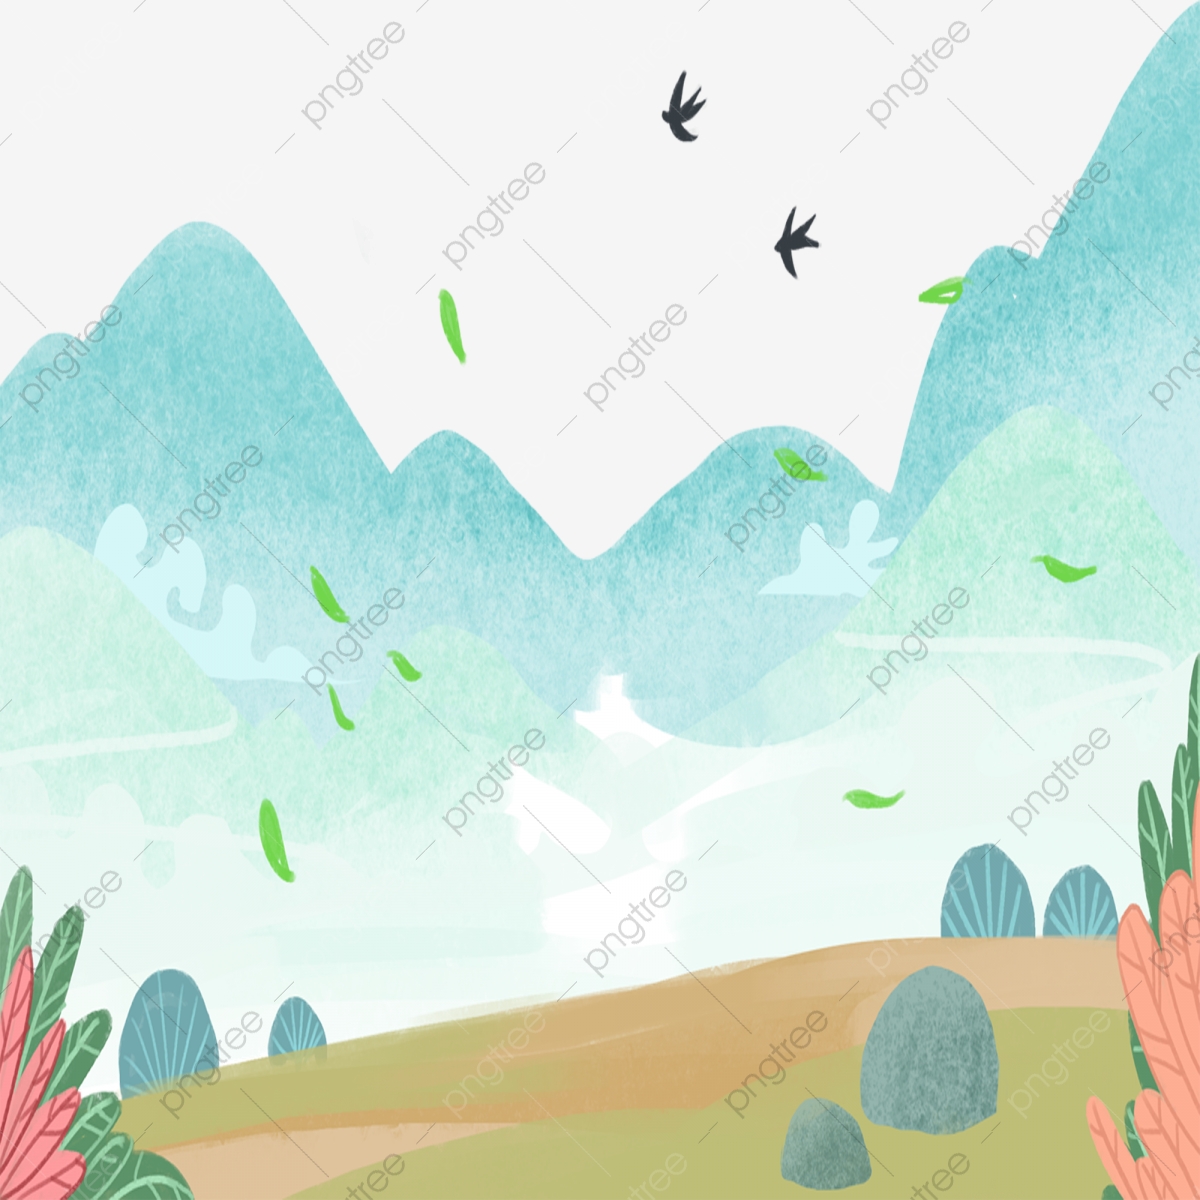 Clipart mountain spring. Beautiful scenery forest natural